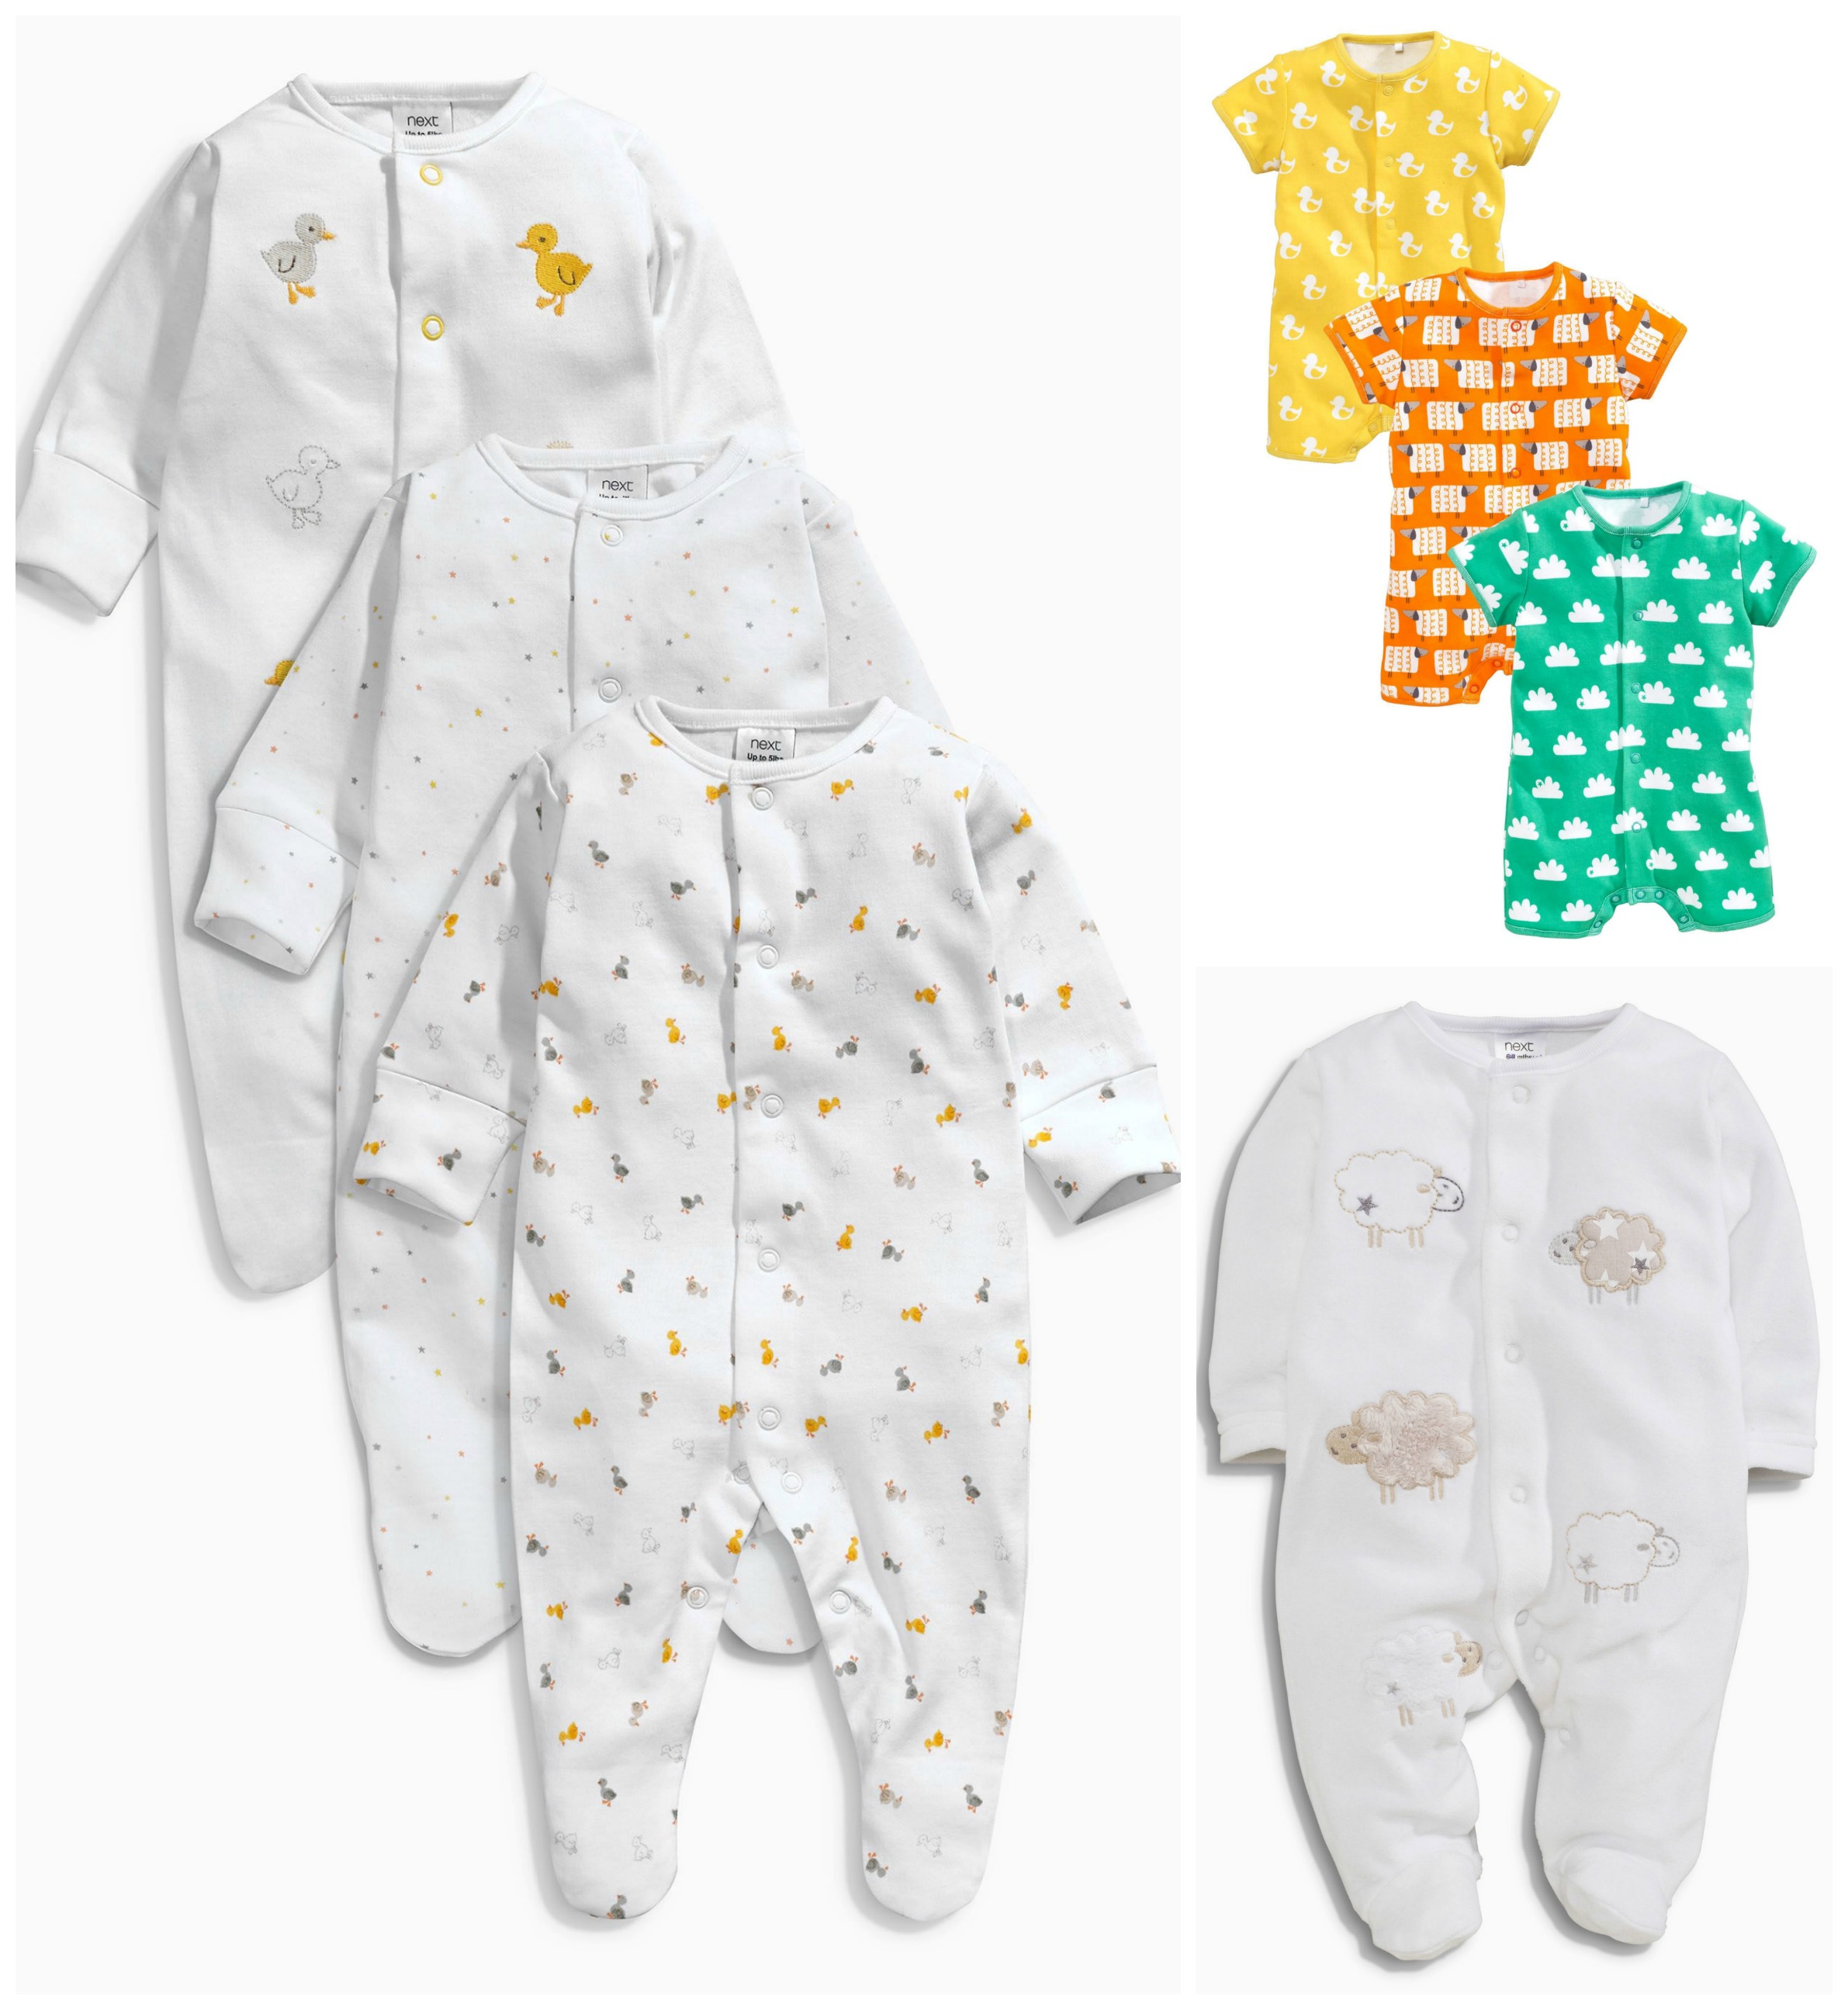 Unisex Baby Clothes Perfect For Spring  Lamb  Bear